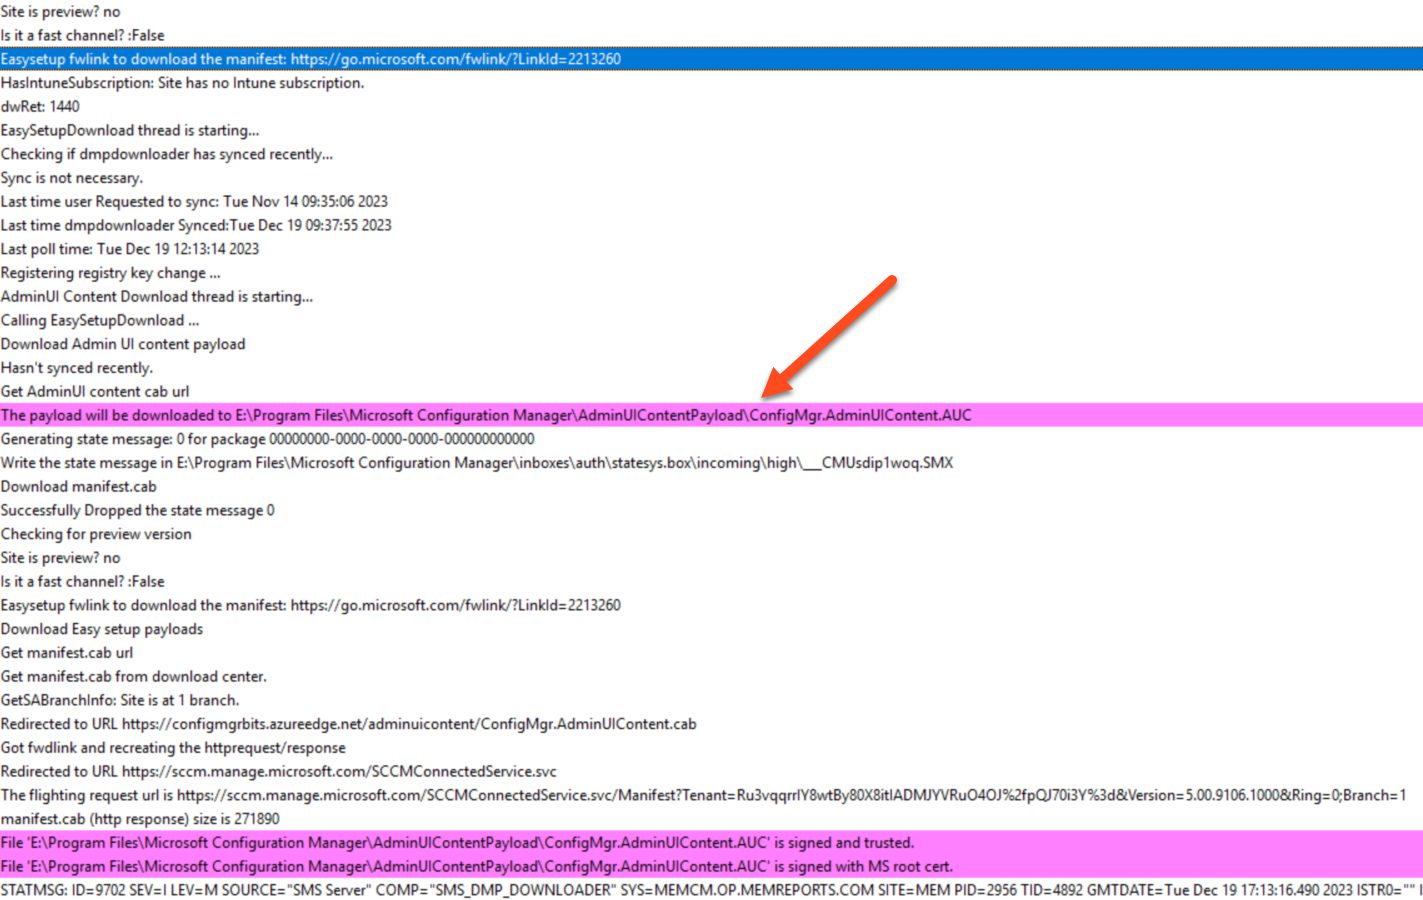 ConfigMgr.AdminUIContent.AUC being downloaded within the Dmpdownloader.log